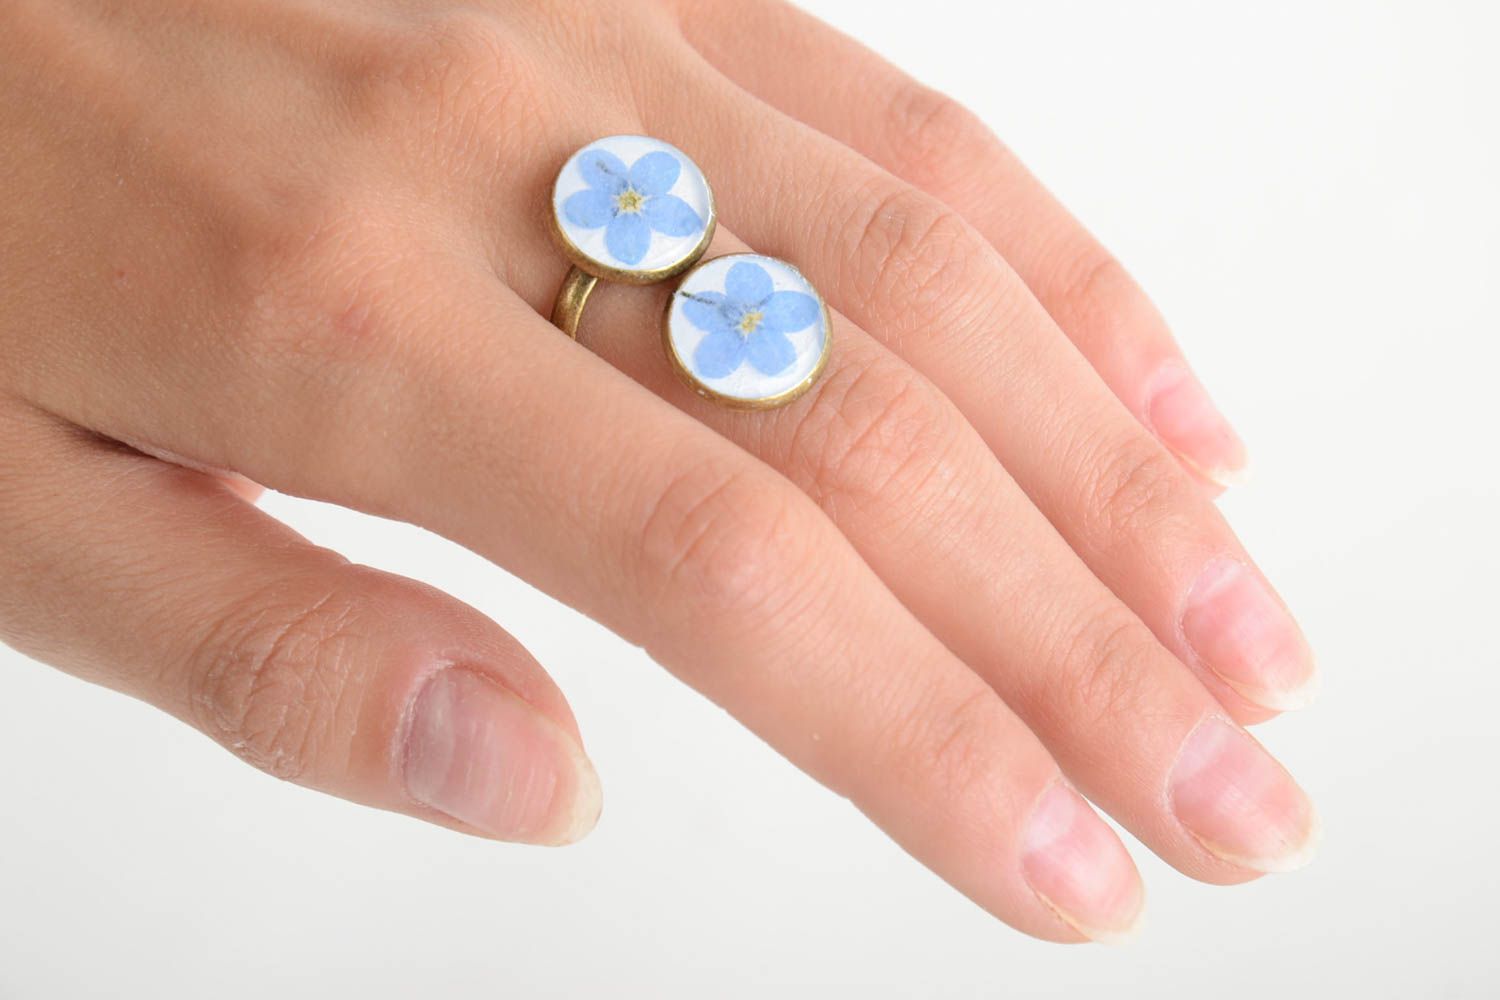 Handmade exquisite metal jewelry ring with blue flowers in epoxy resin photo 2